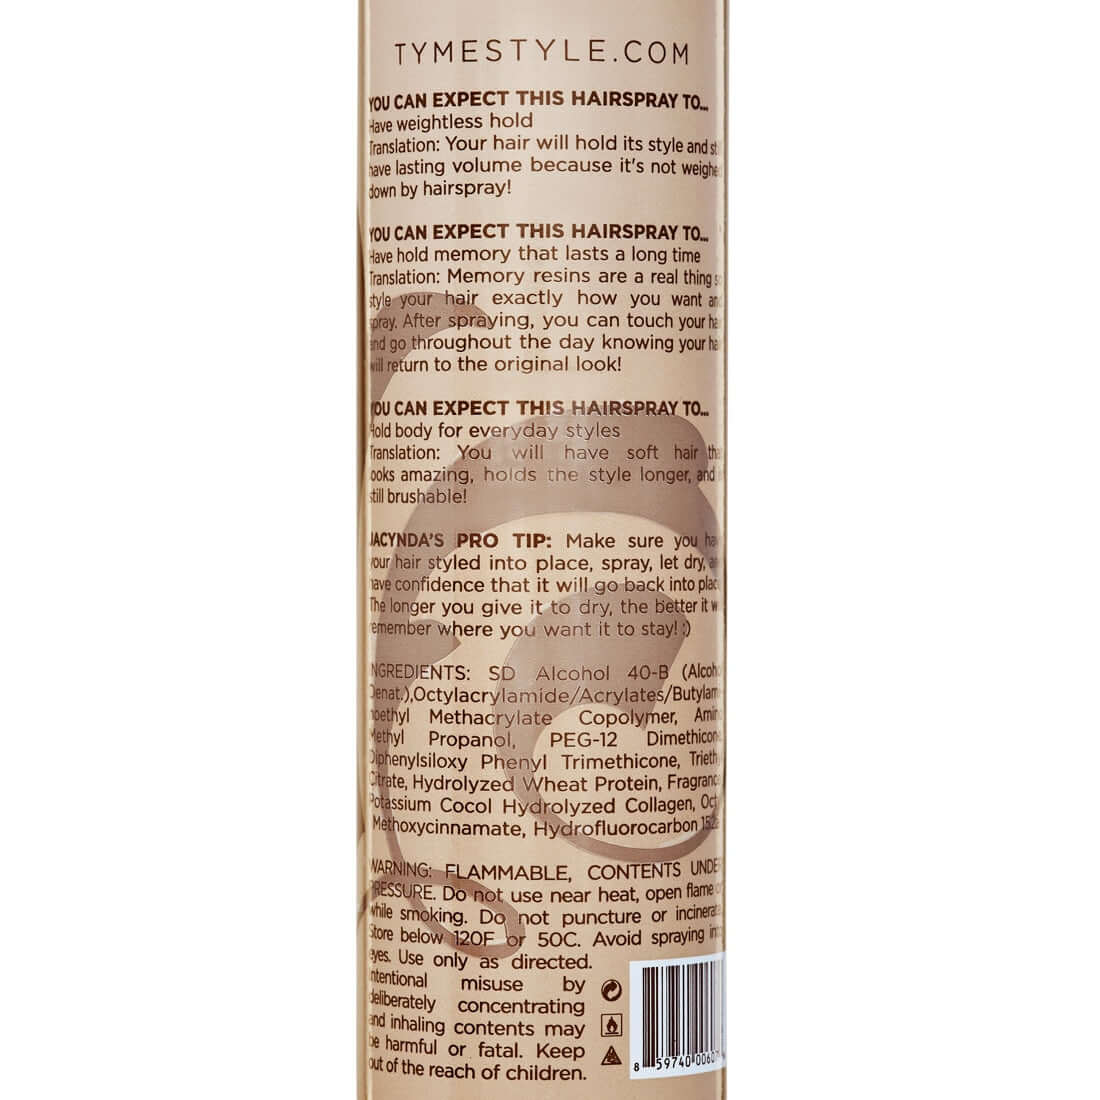 TYME SELFIETYME Hairspray with product details and directions for use.